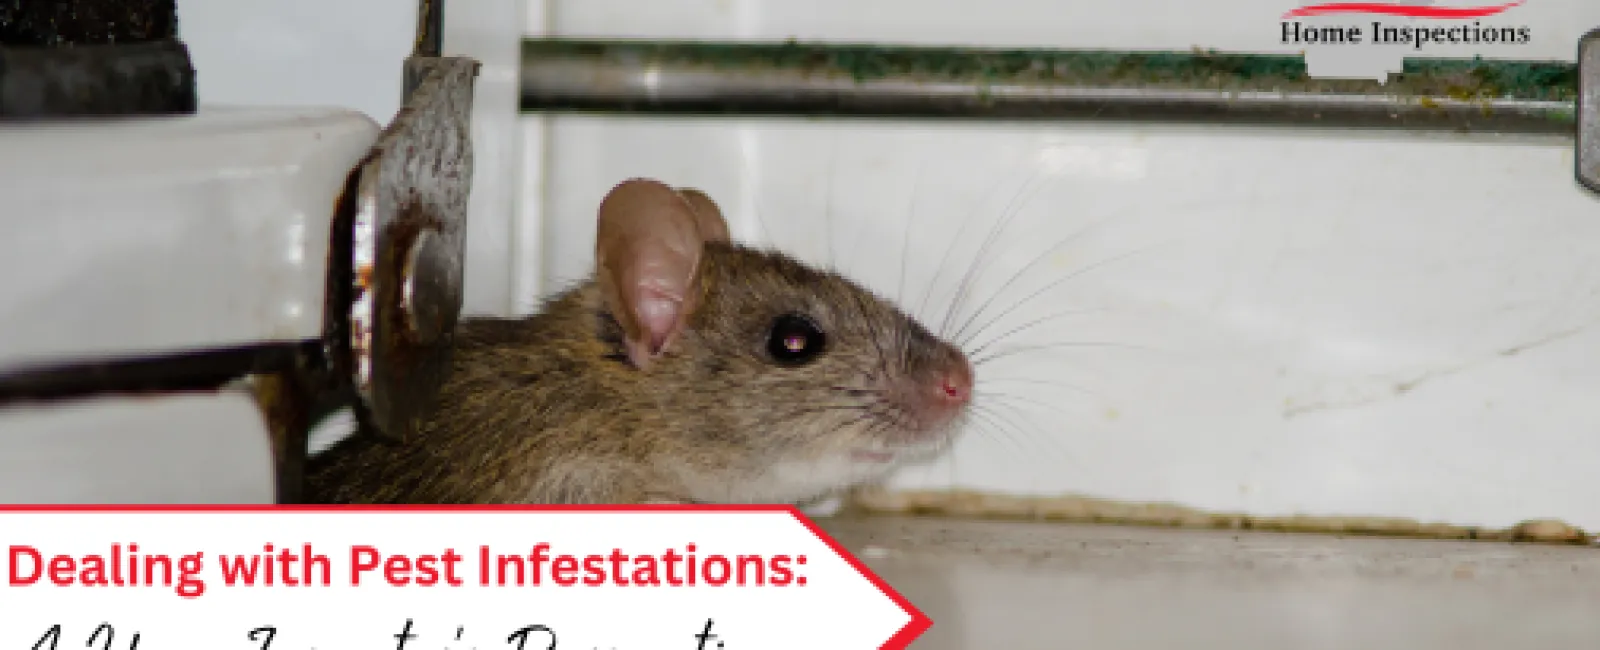 Dealing with Pest Infestations: A Home Inspector's Perspective.